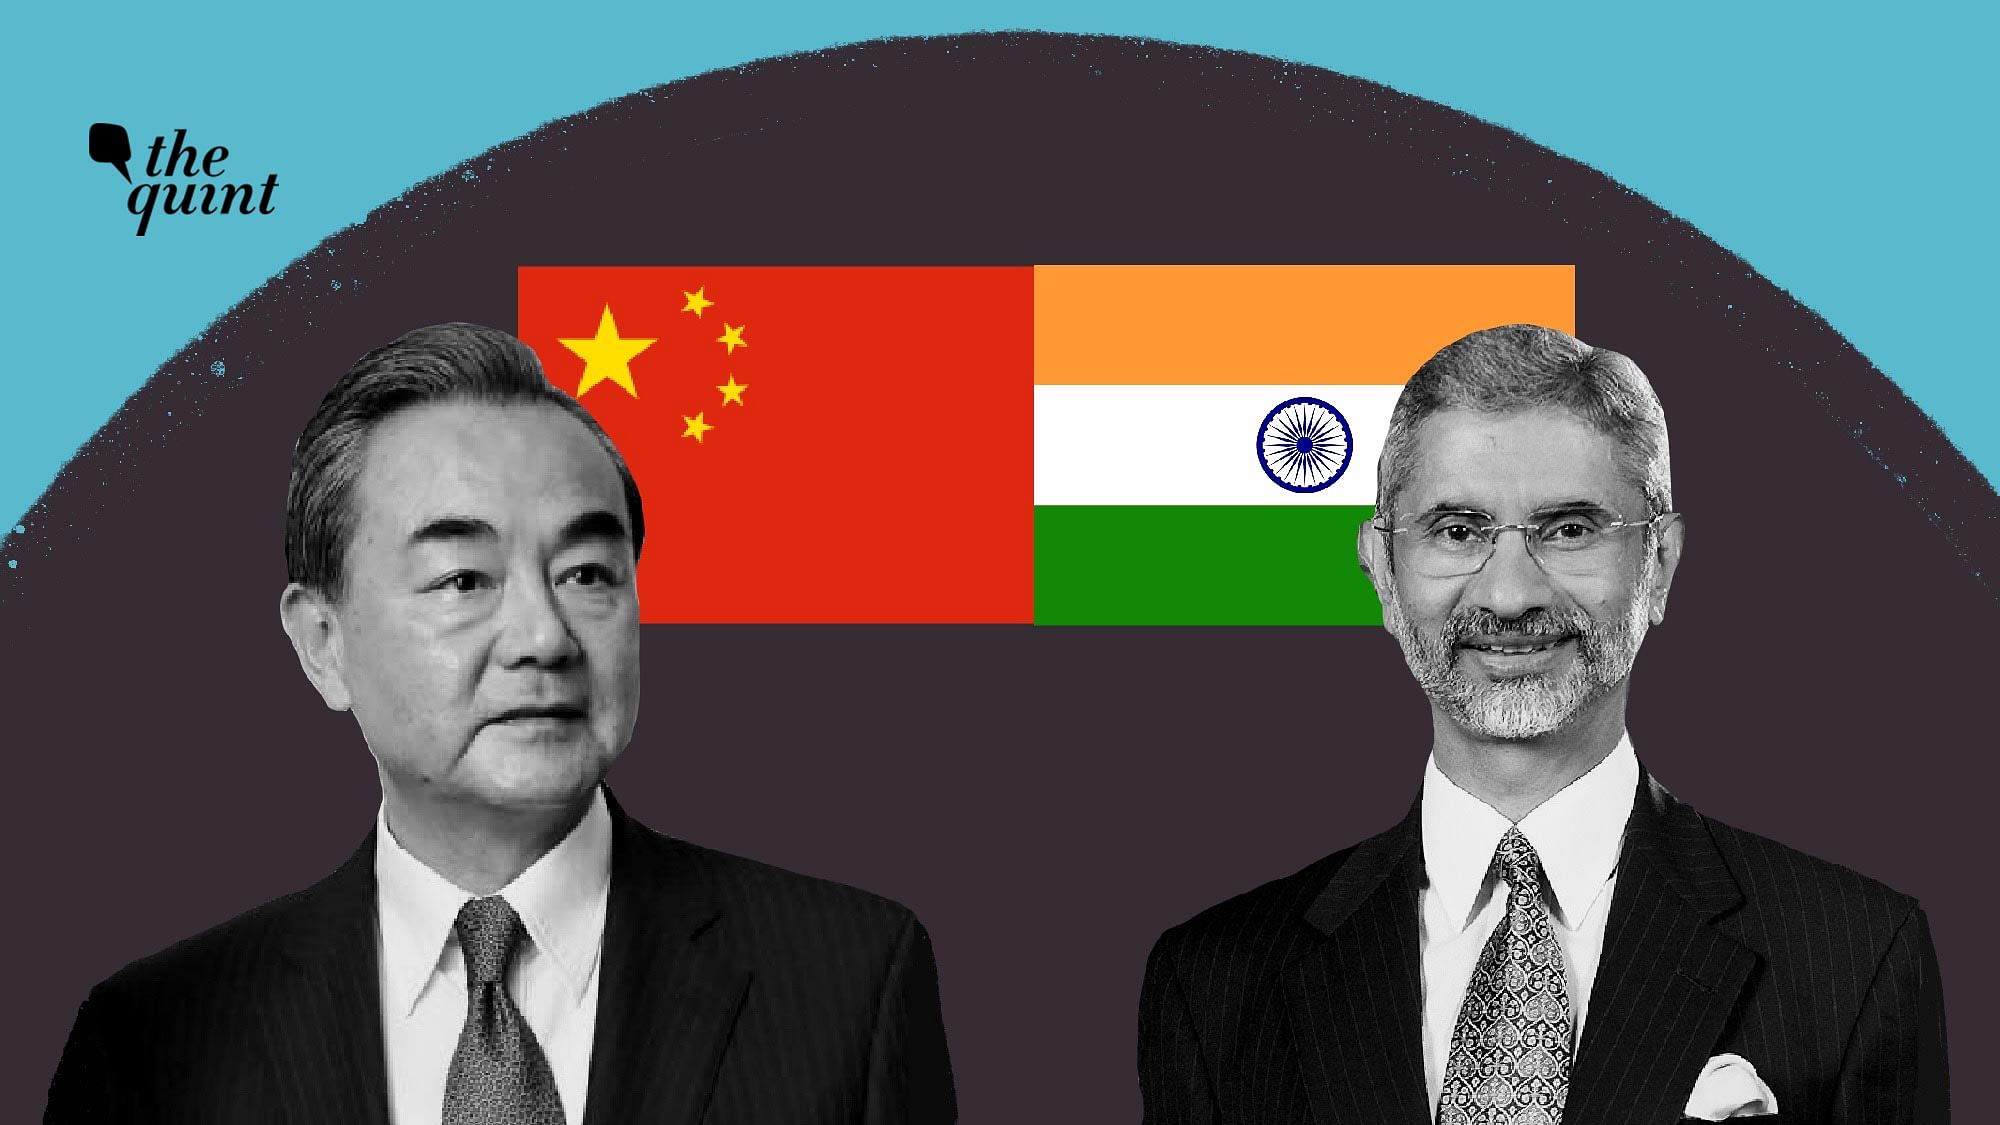 Image of Indian External Affairs Minister Dr S Jaishankar (R) and Chinese State Councillor and Foreign Minister Wang Yi (L) used for representational purposes.